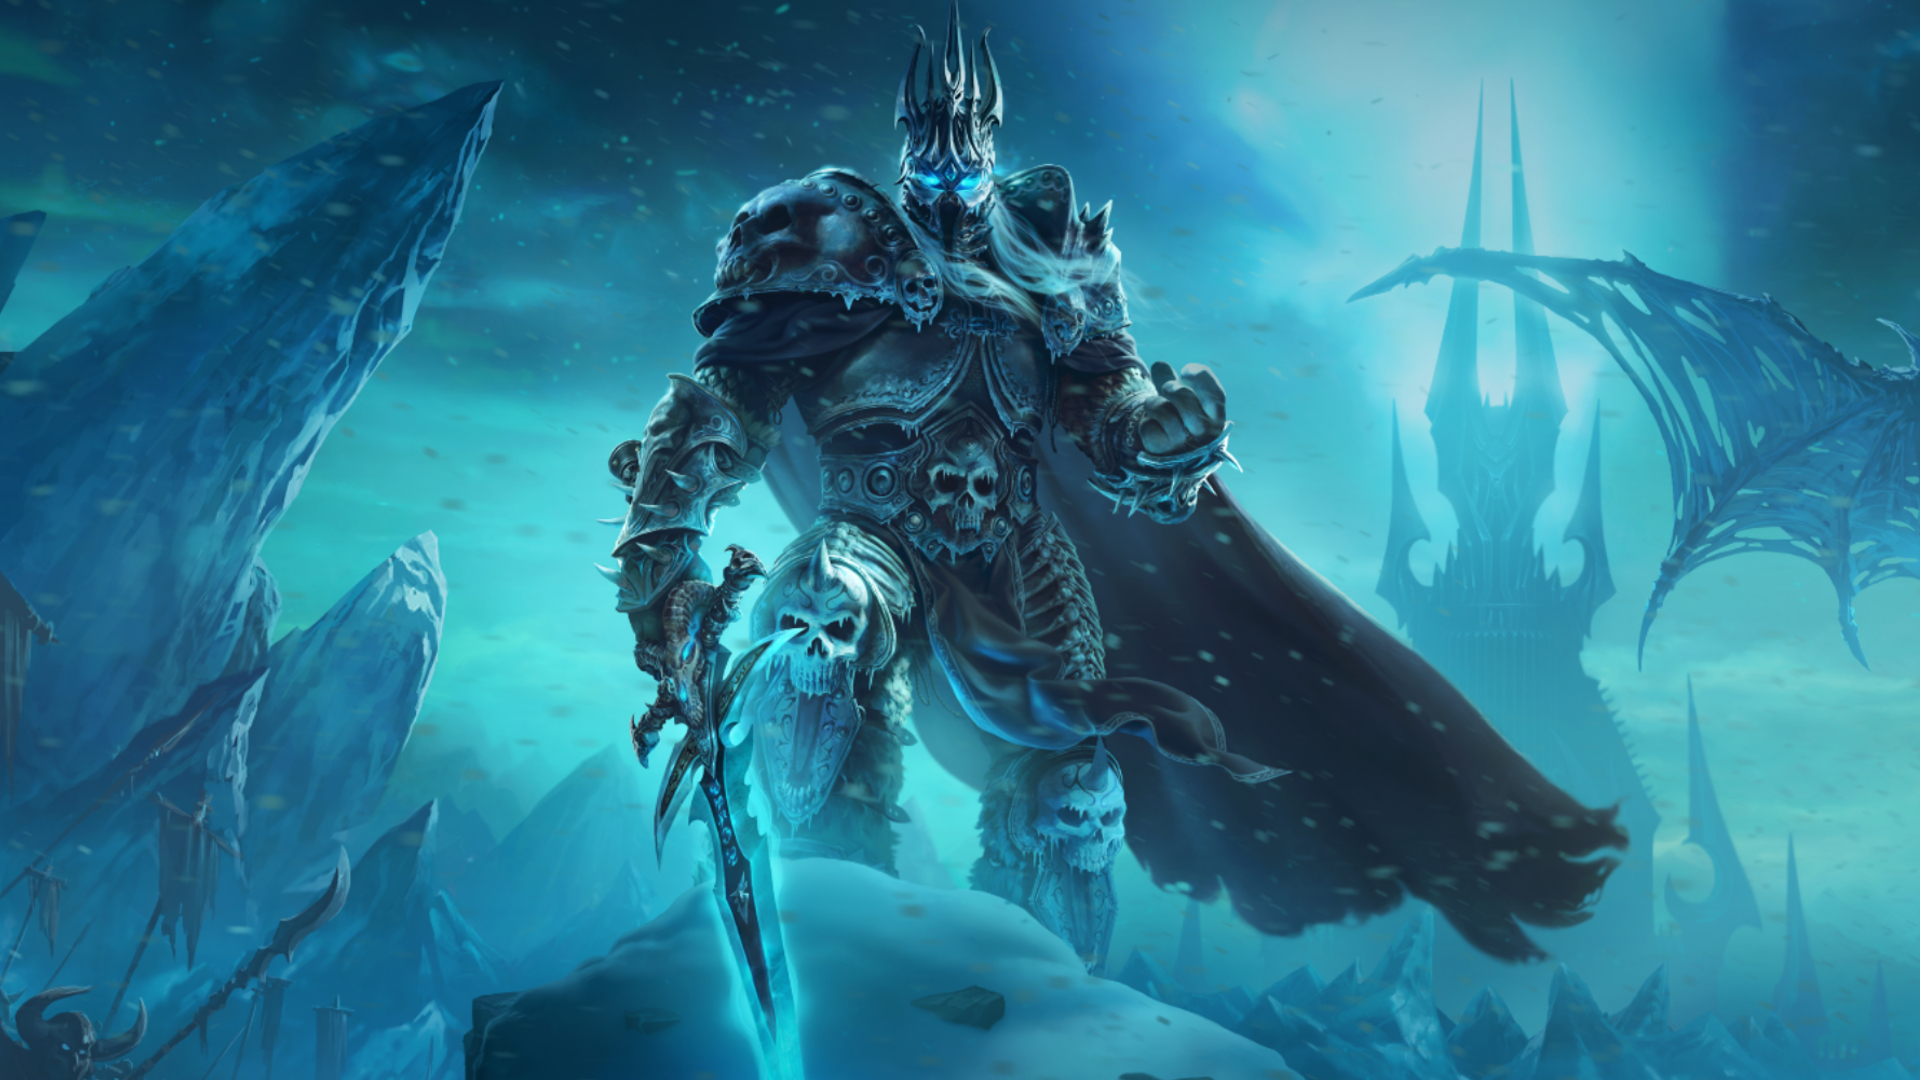 WoW Wrath of the Lich King Classic release date met with memes